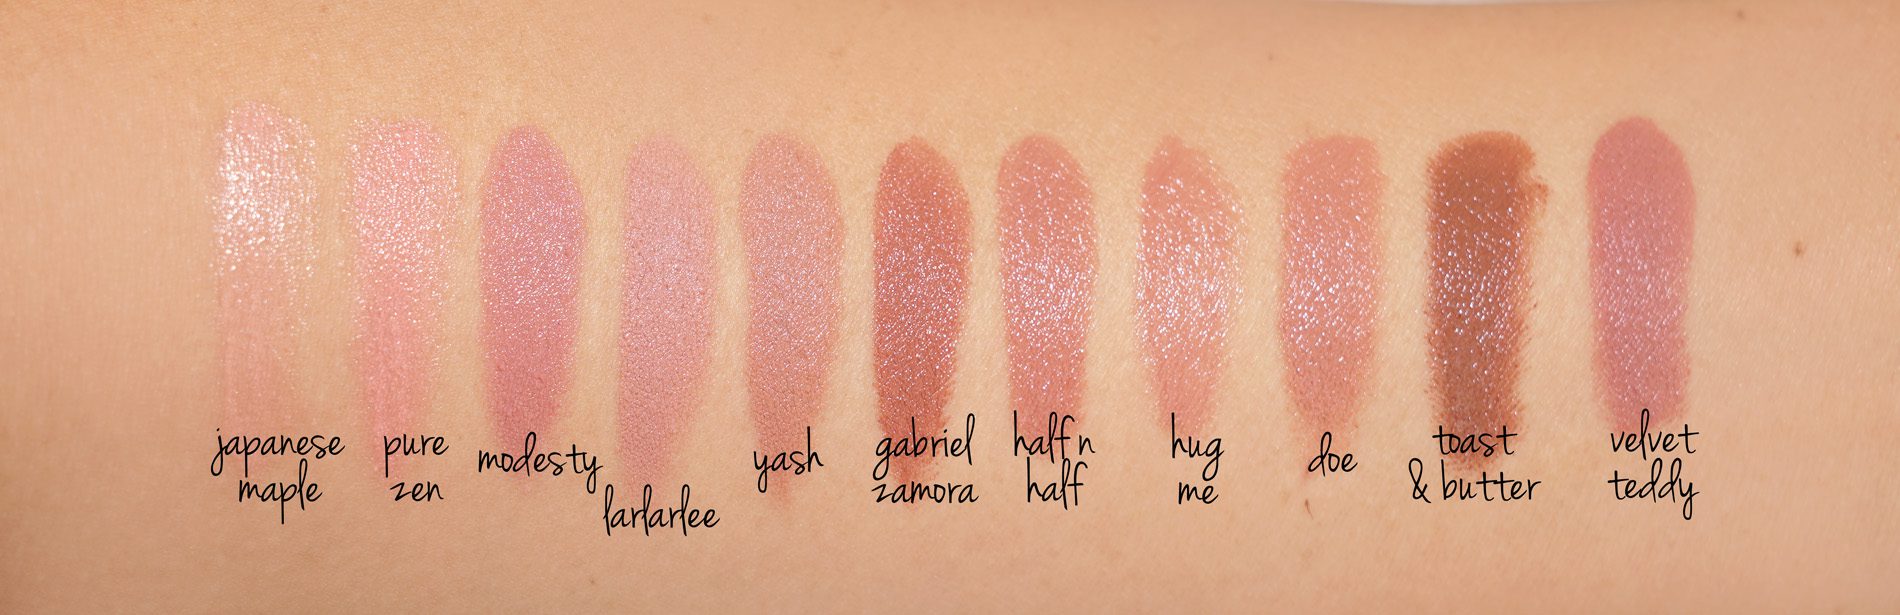 Mac Naked Lipstick Swatches Model For Instructional Design